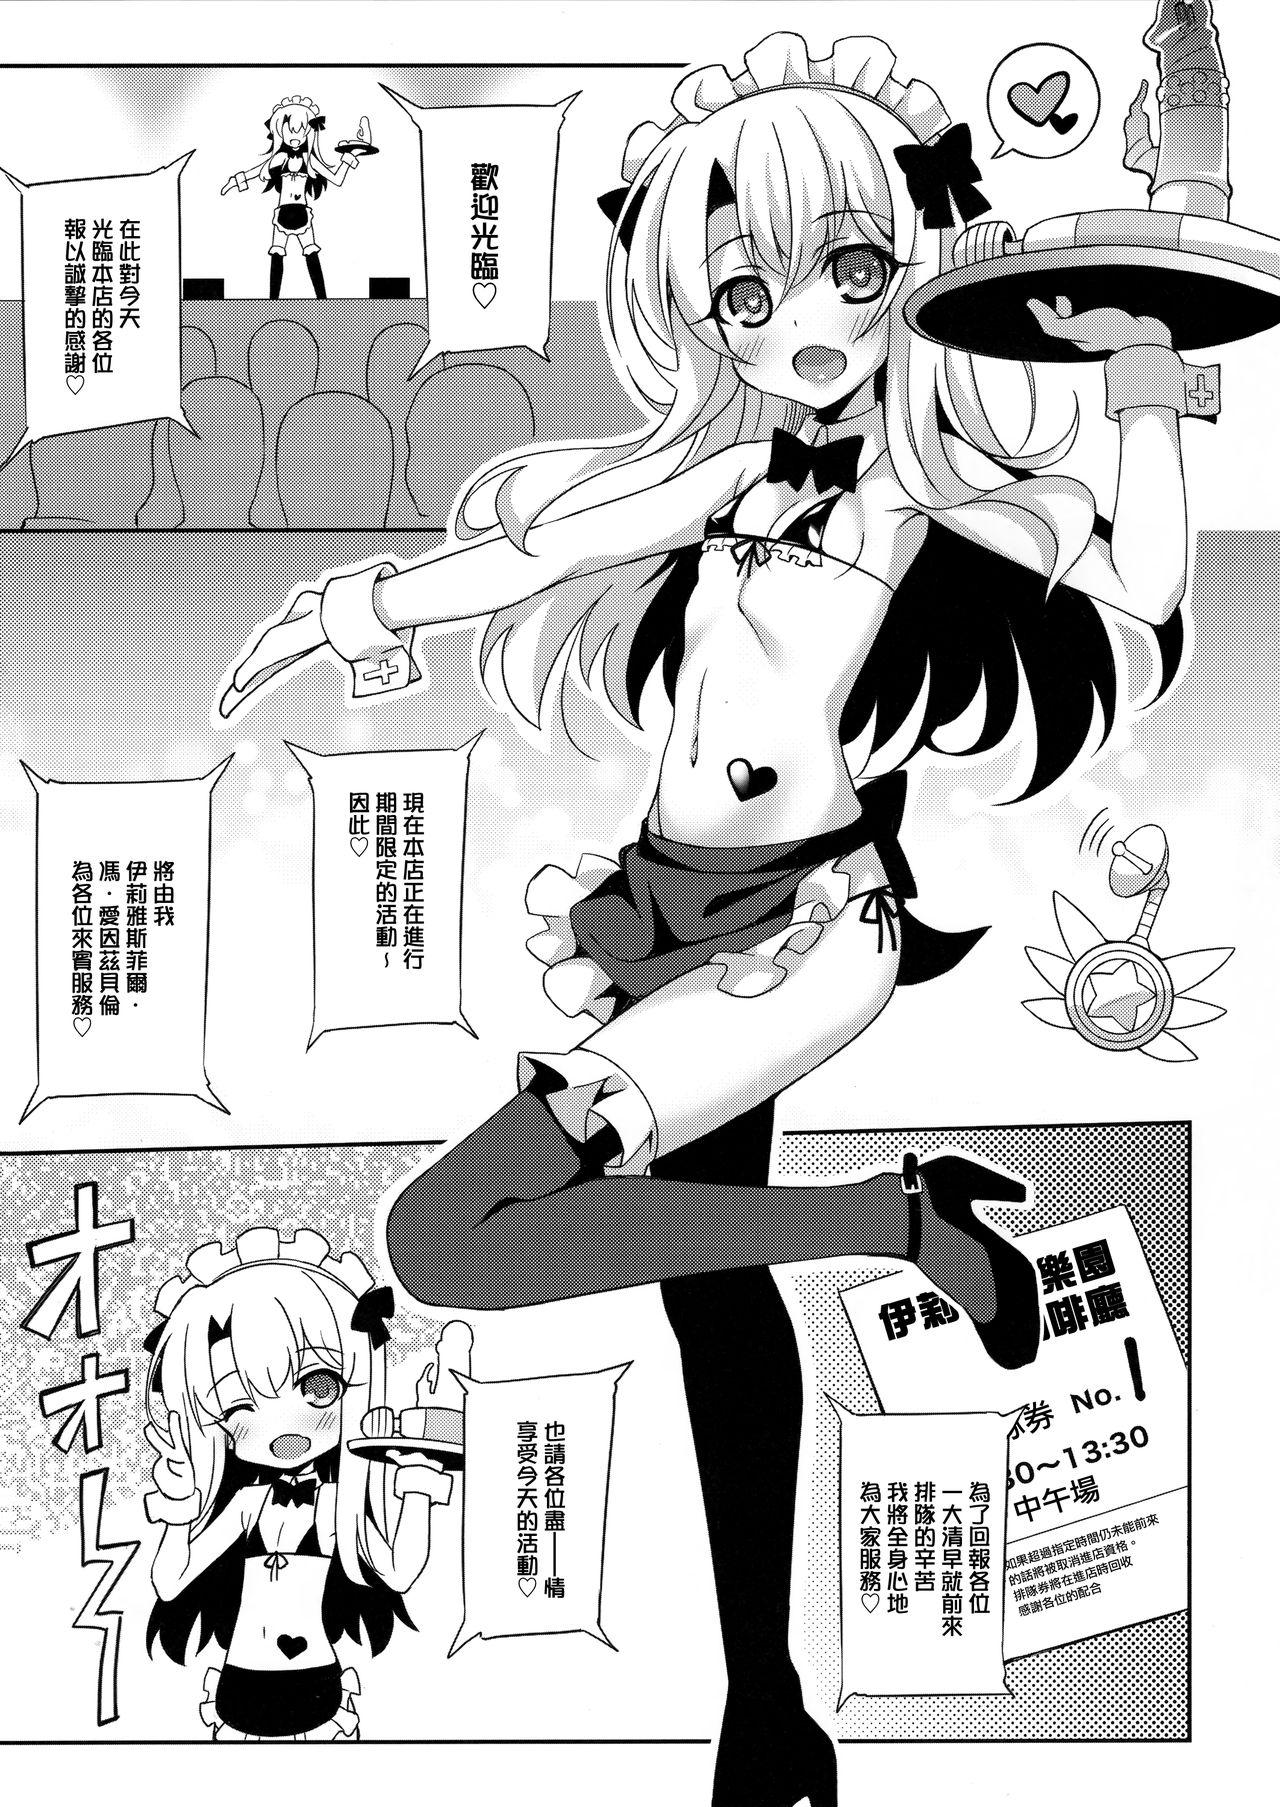 Thot Illy Asobi Cafe - Fate kaleid liner prisma illya Ass - Page 4